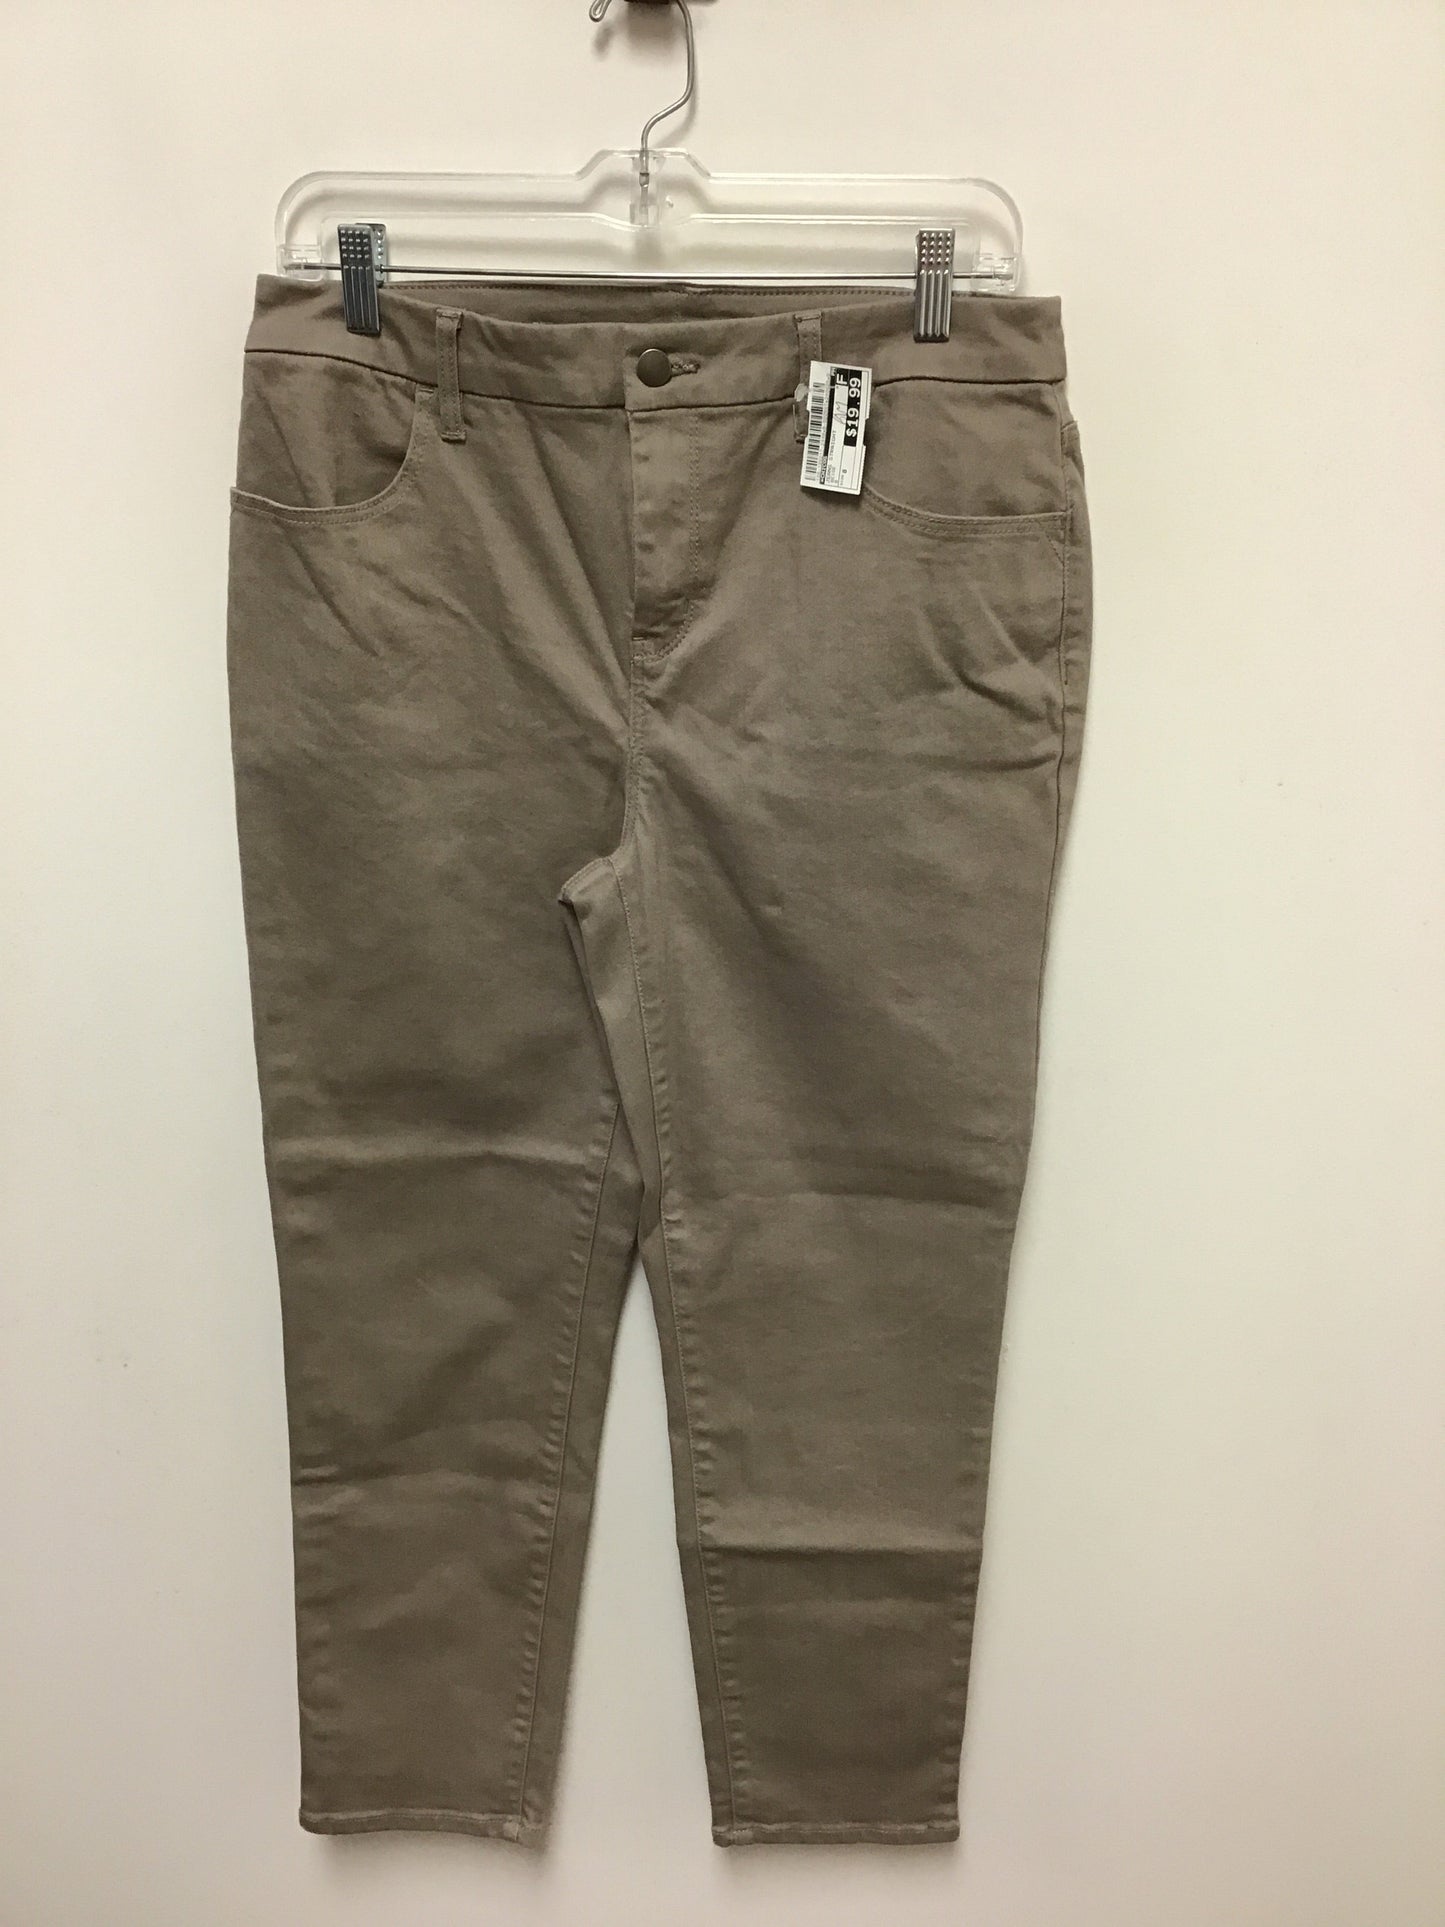 Beige Jeans Straight Chicos, Size 8